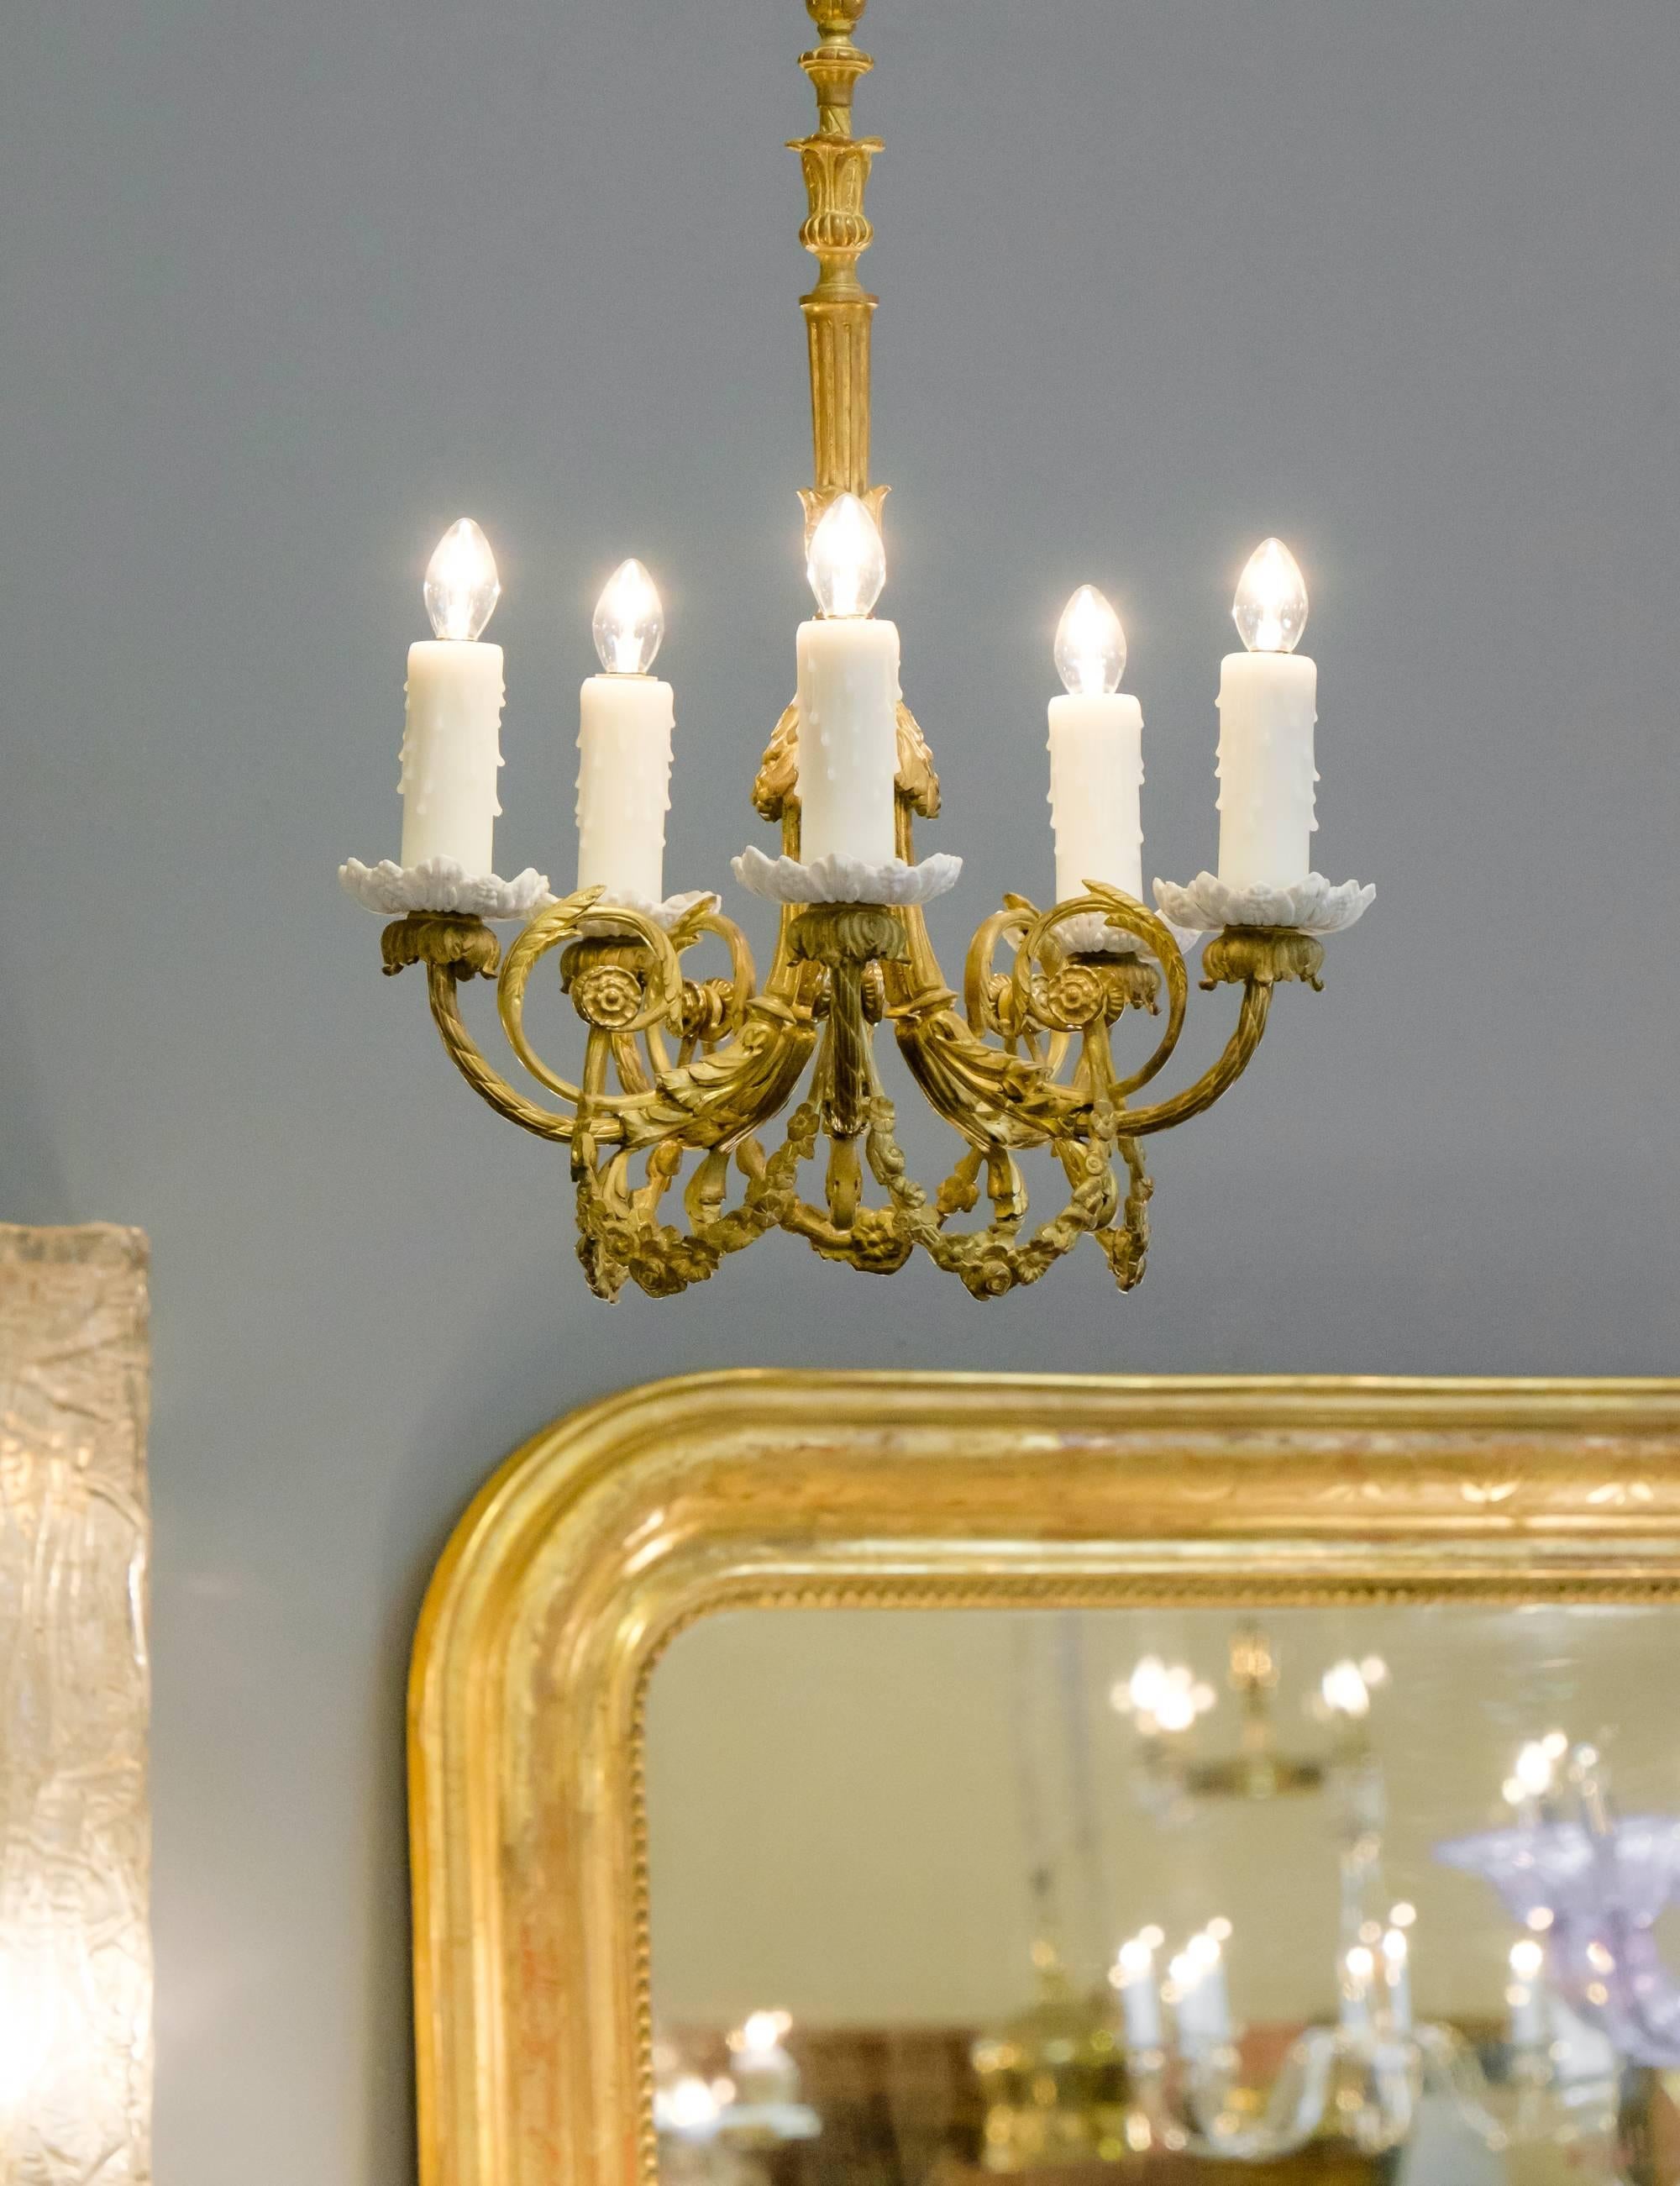 A French 19th century gold-leafed chandelier with porcelain bobeches featuring six arms that have ornately scrolled foliage decoration. This fixture has an equally detailed stem and finial.